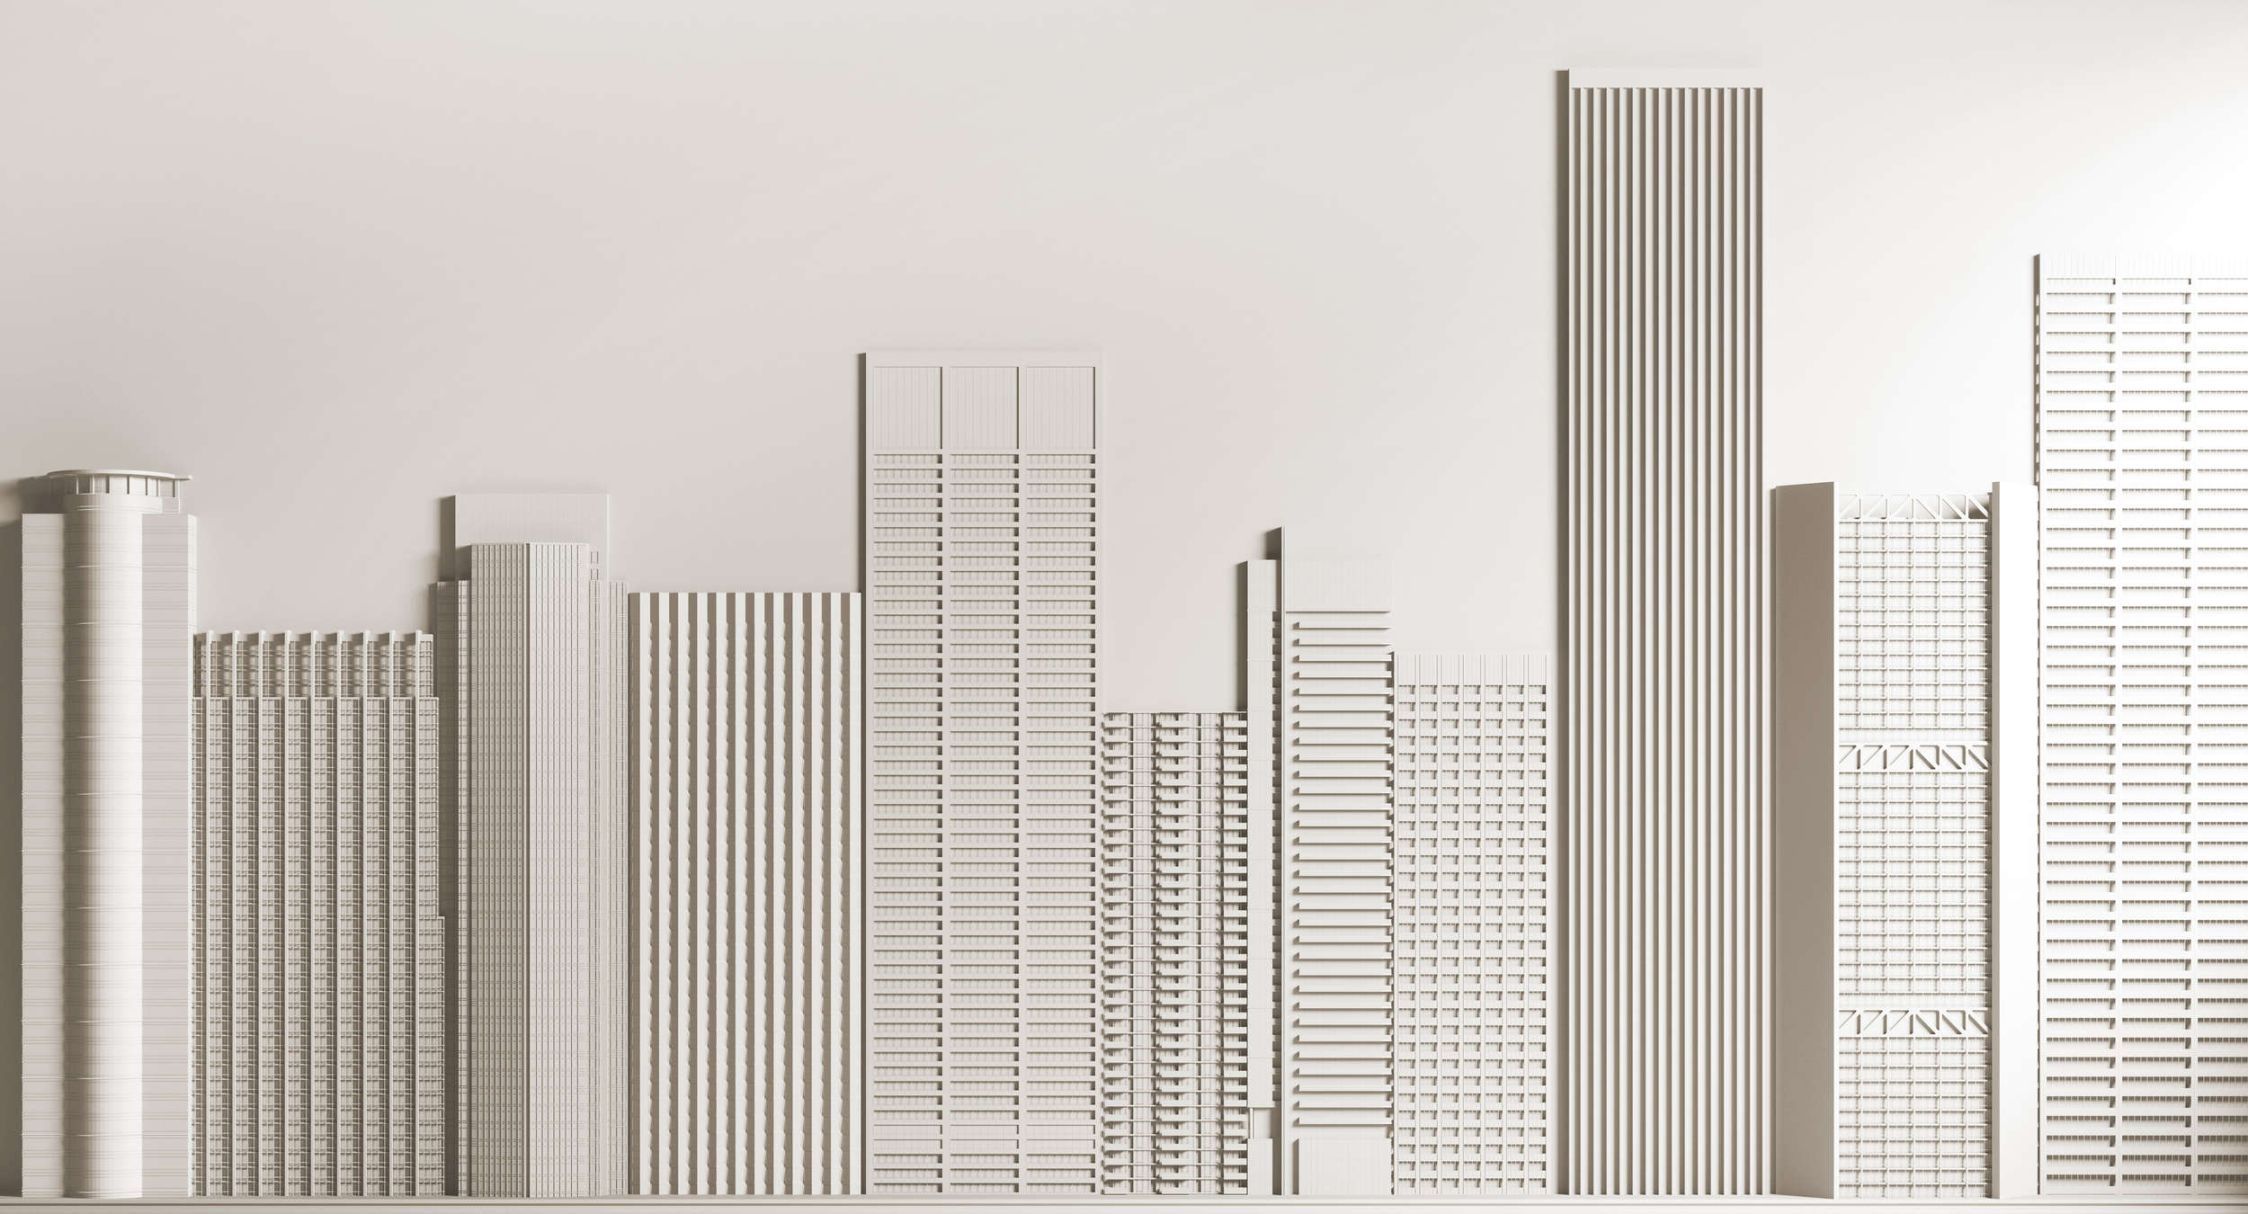             Photo wallpaper »new skyline« - Architecture with skyscrapers - Smooth, slightly pearlescent non-woven fabric
        